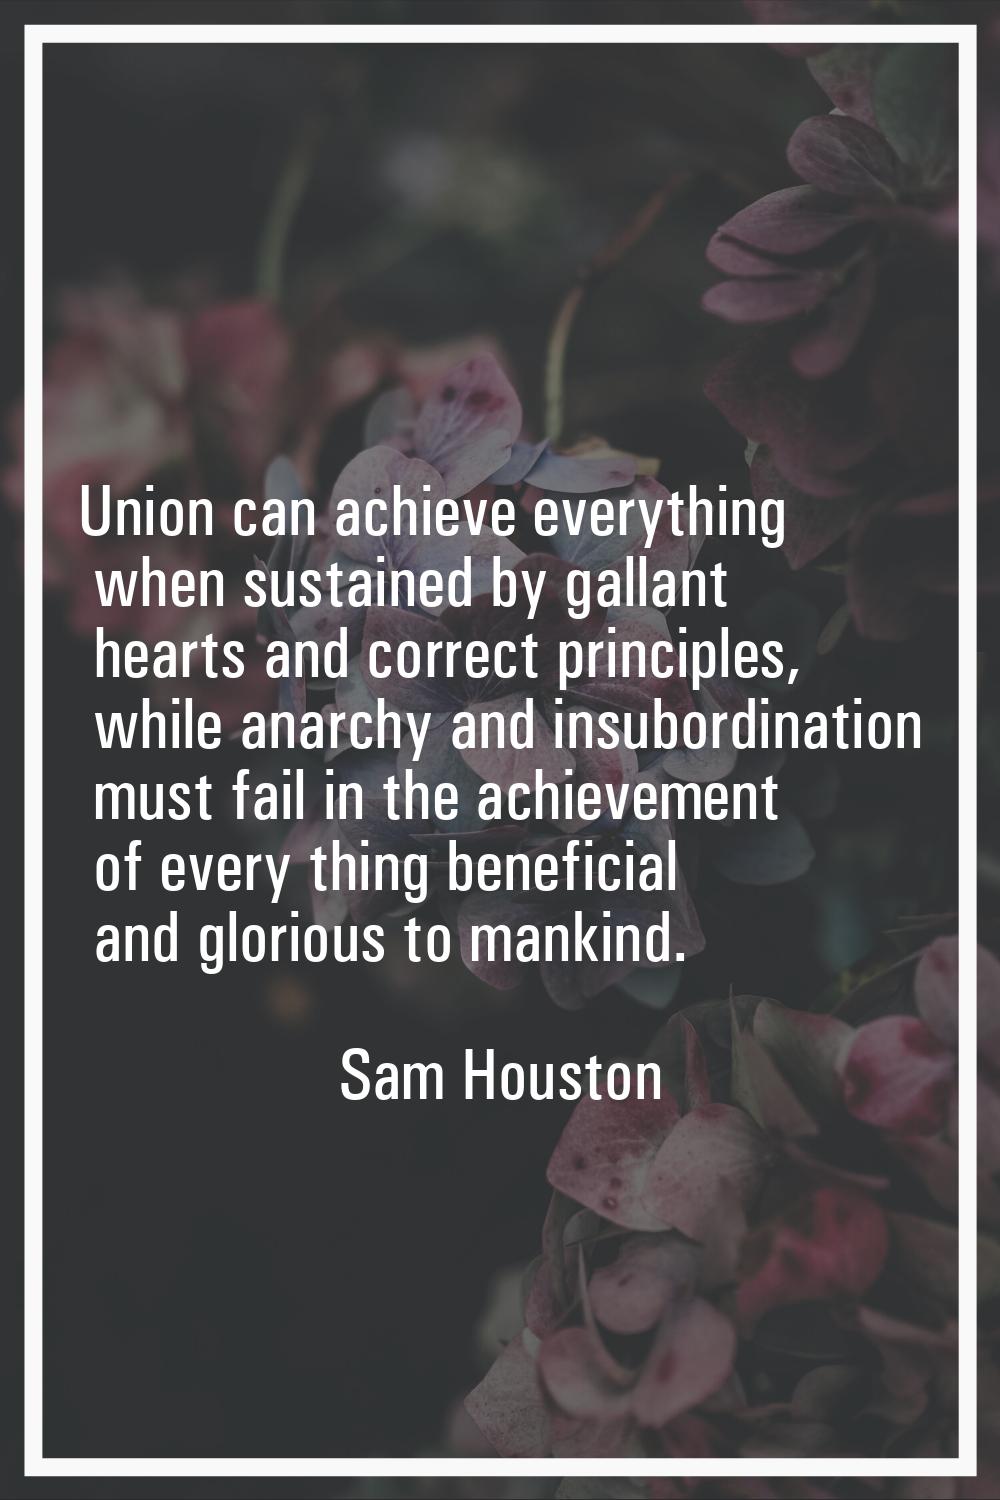 Union can achieve everything when sustained by gallant hearts and correct principles, while anarchy